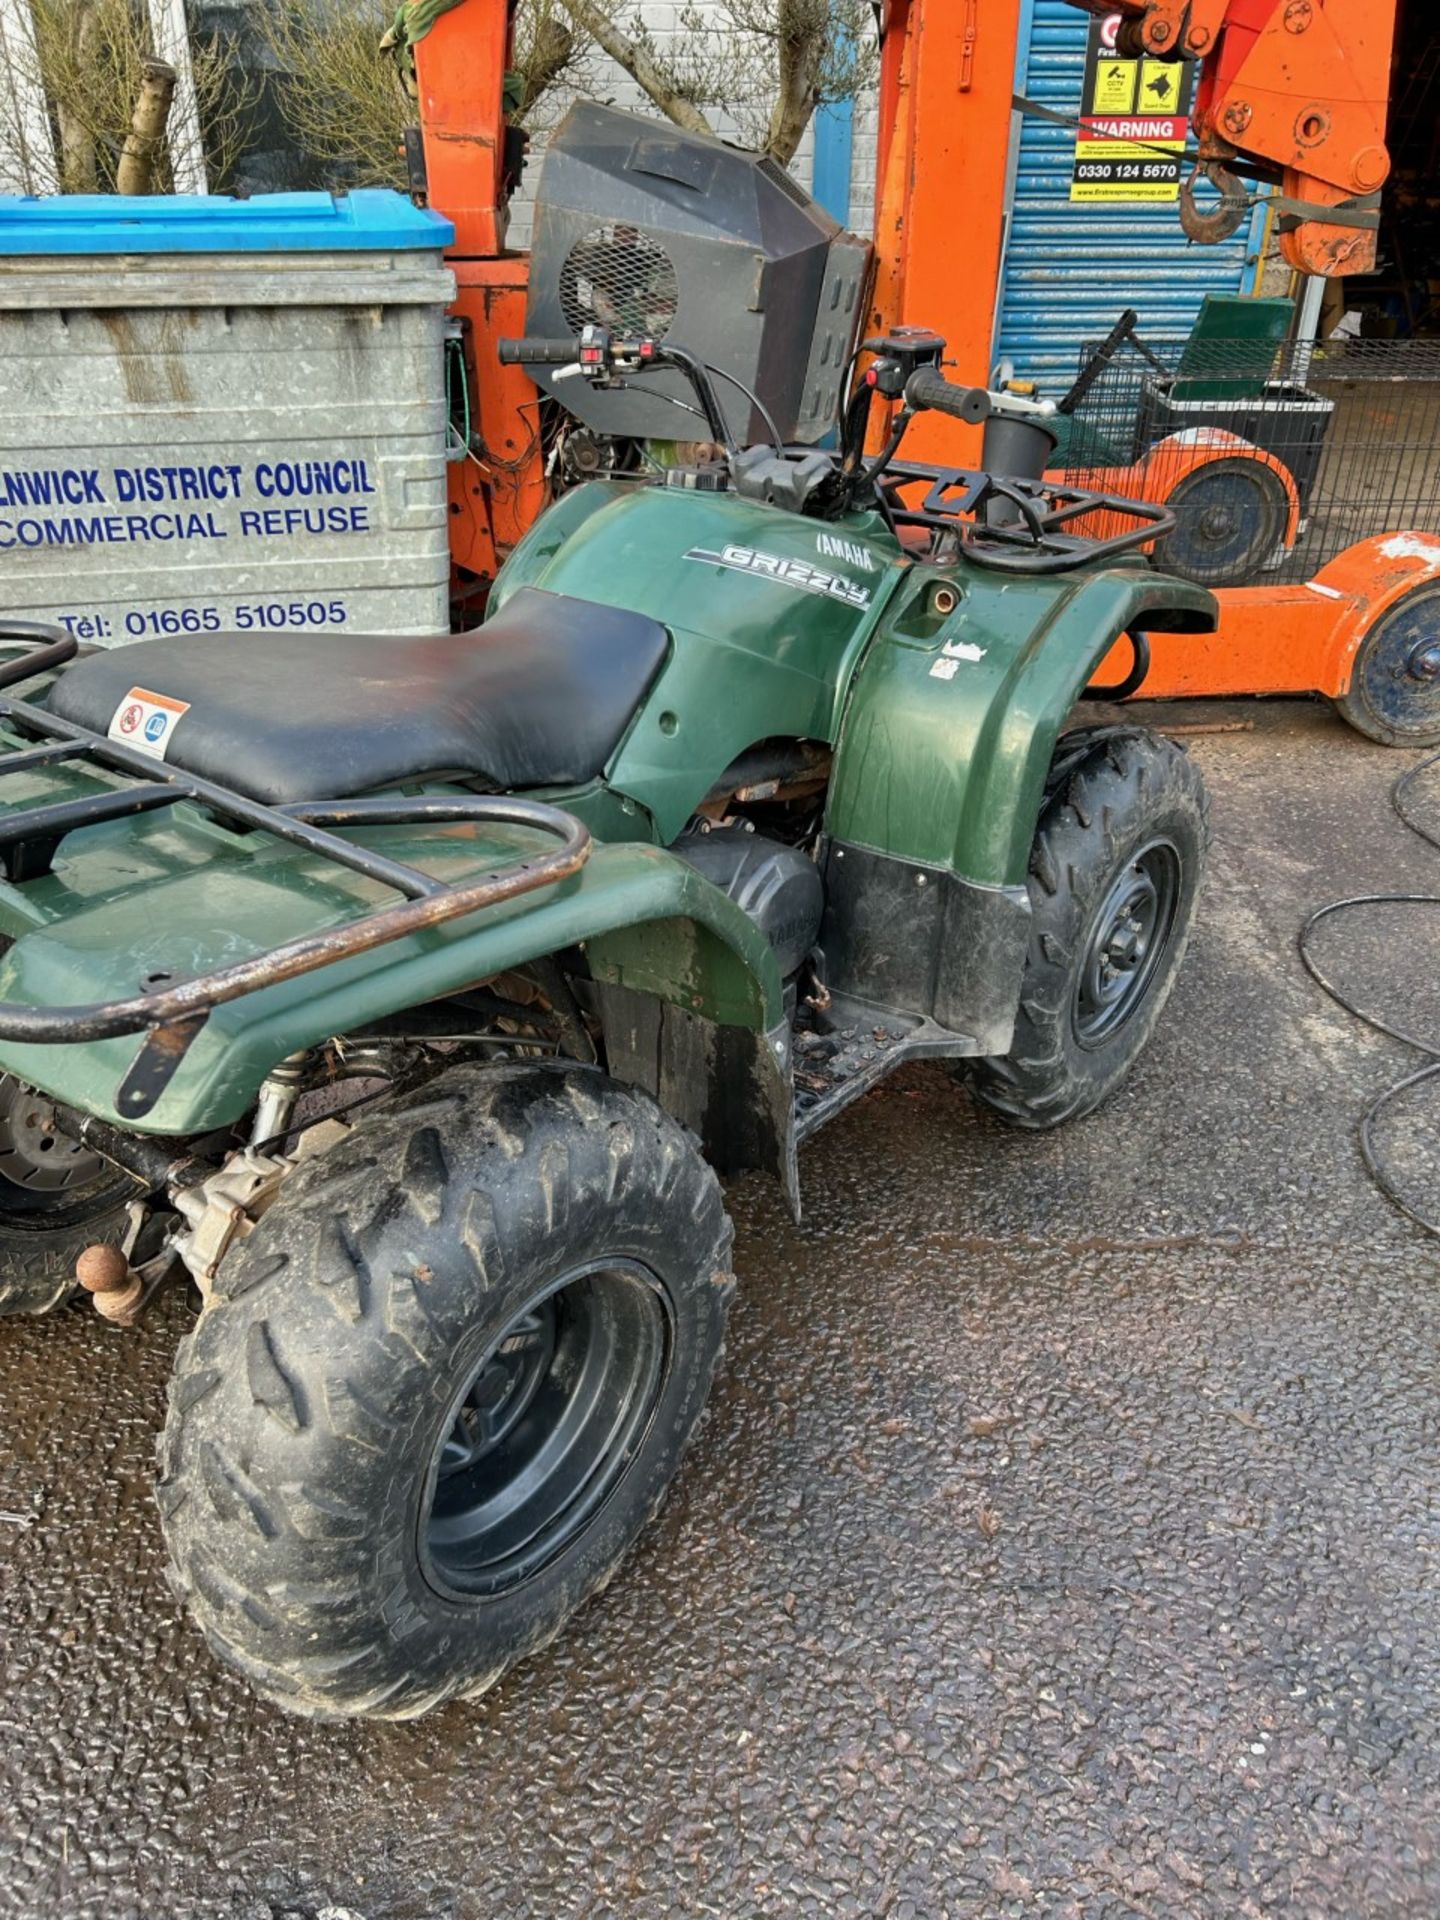 Yamaha grizzly 400cc 4x4 quad bike. 2000 model. Good condition ready for work. - Image 2 of 3